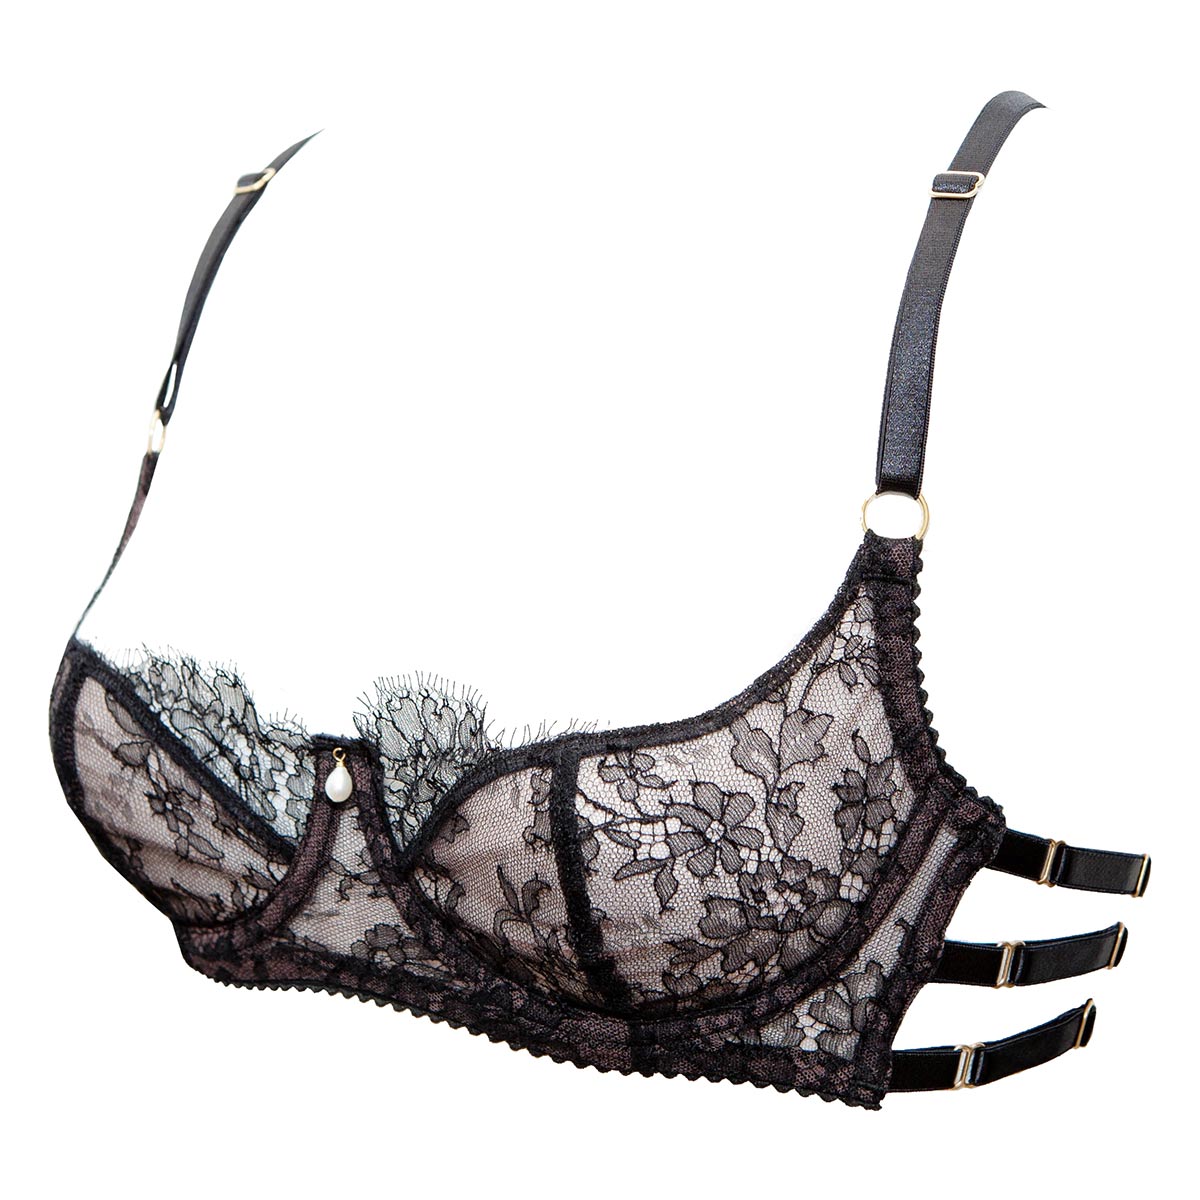 Push-up bra with Chantilly lace Woman, Black